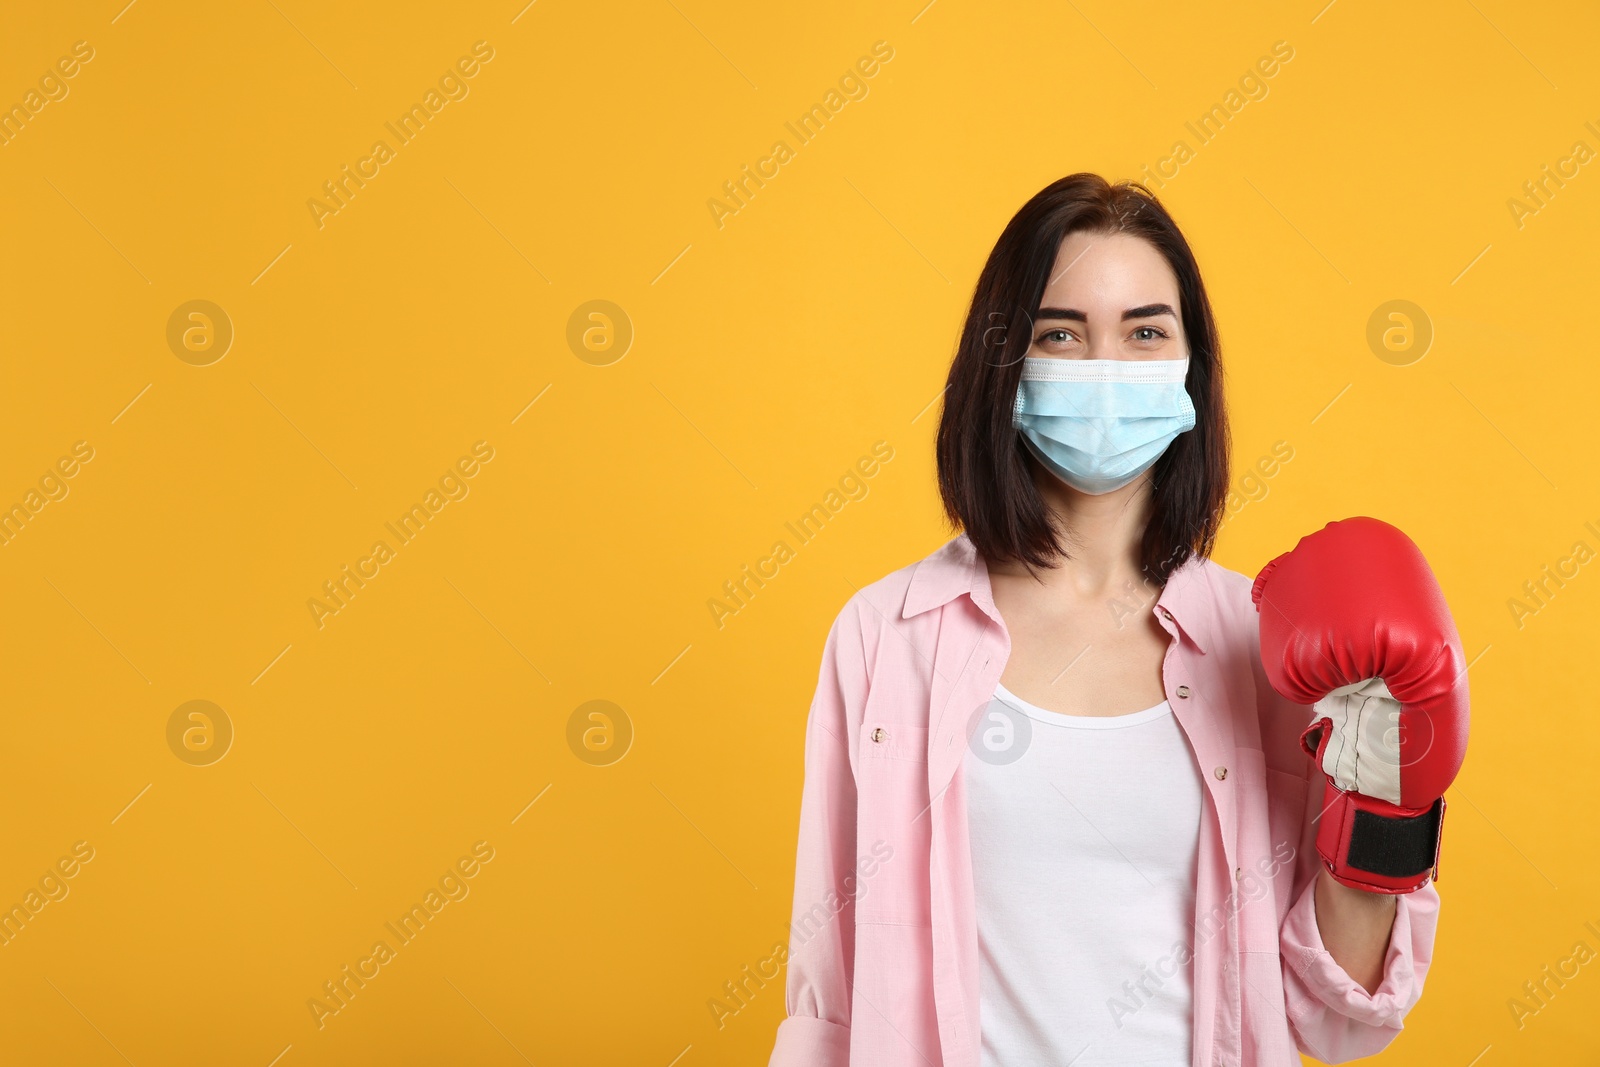 Photo of Woman with protective mask and boxing gloves on yellow background, space for text. Strong immunity concept